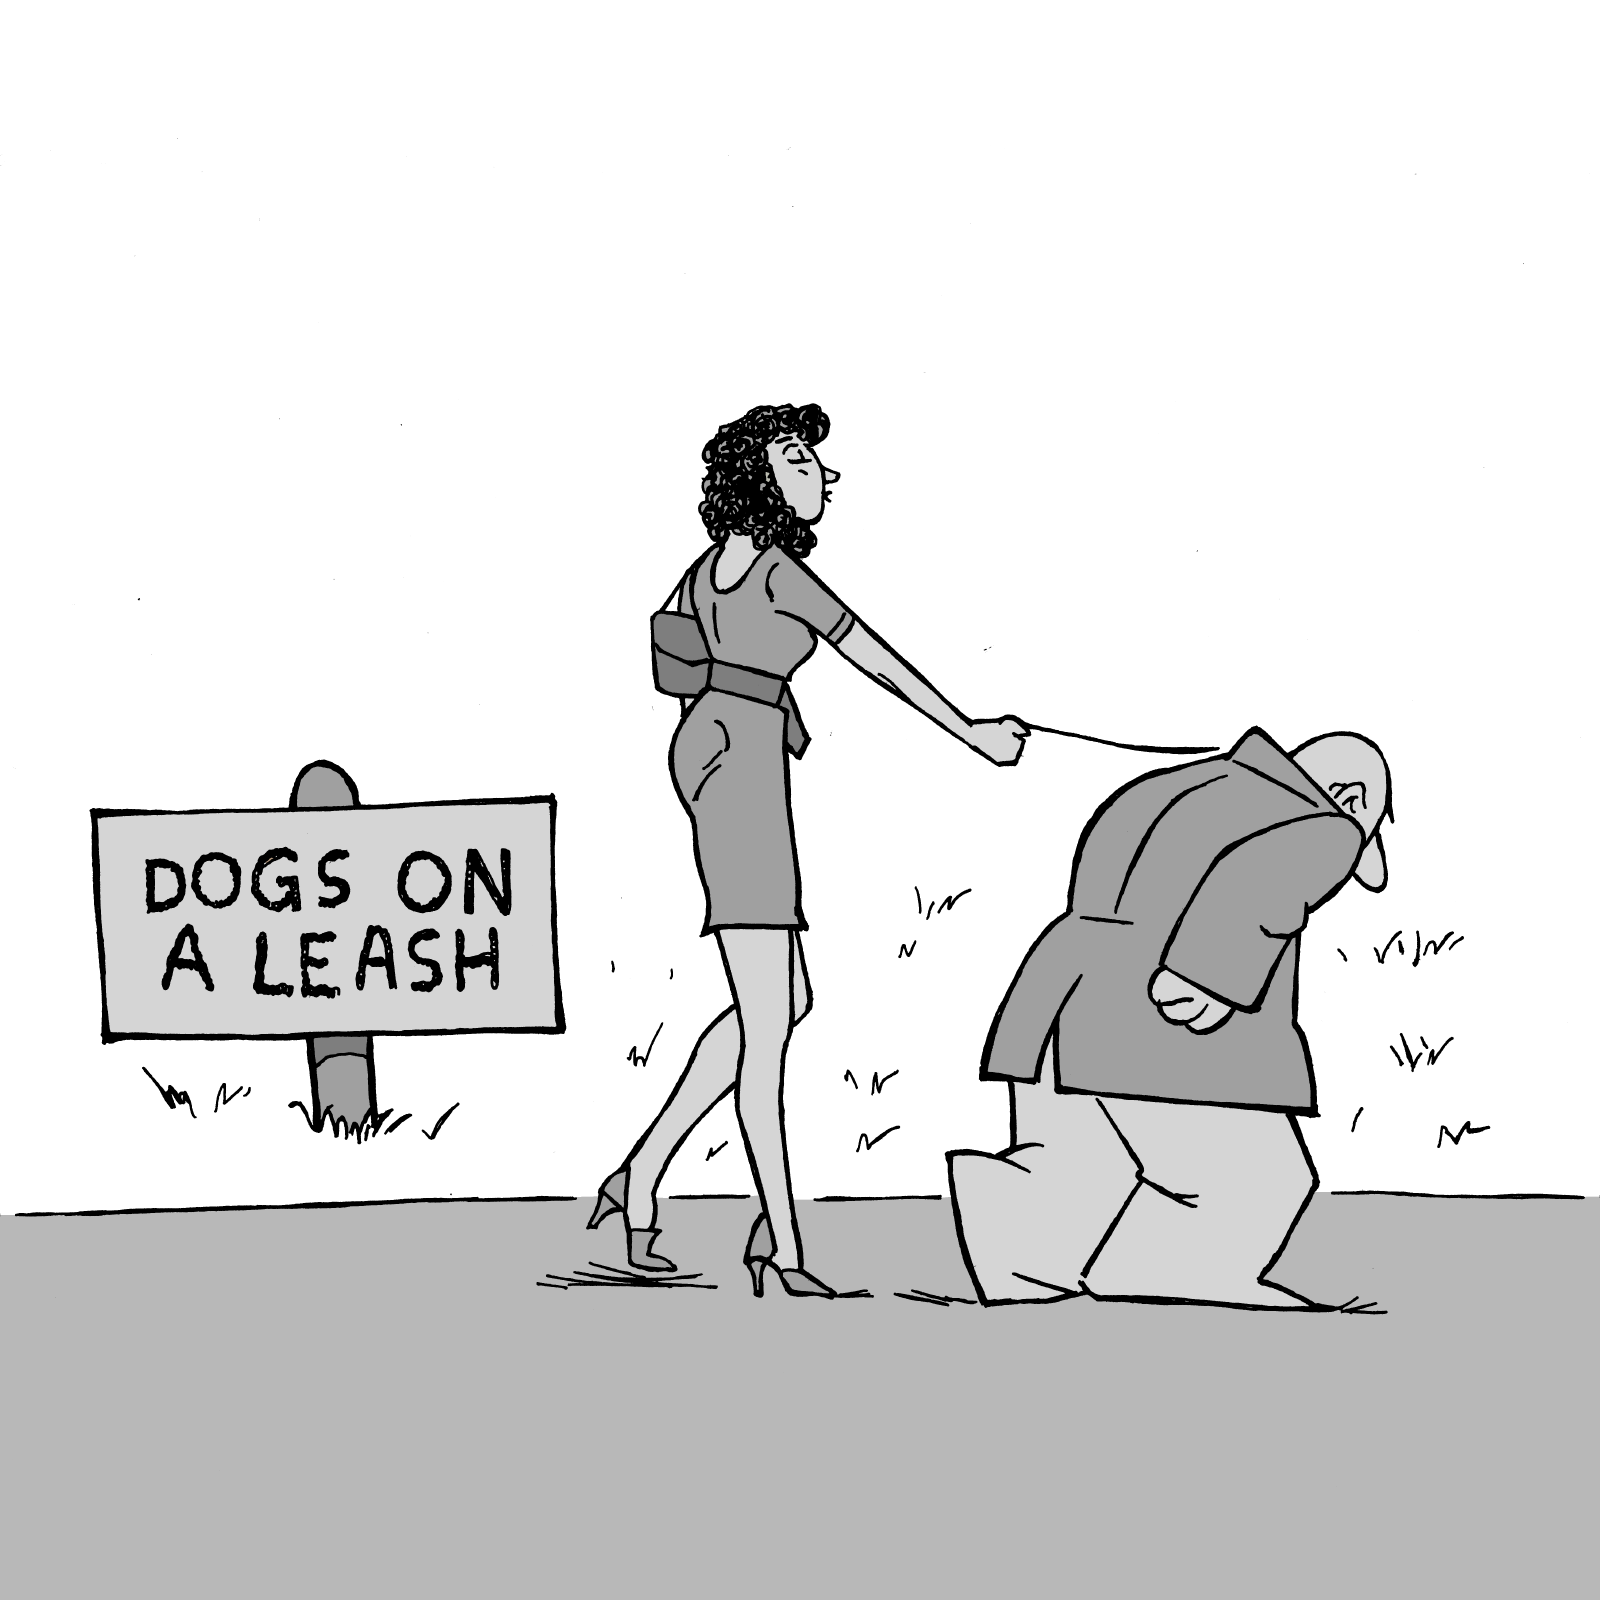 Dogs on a leash!